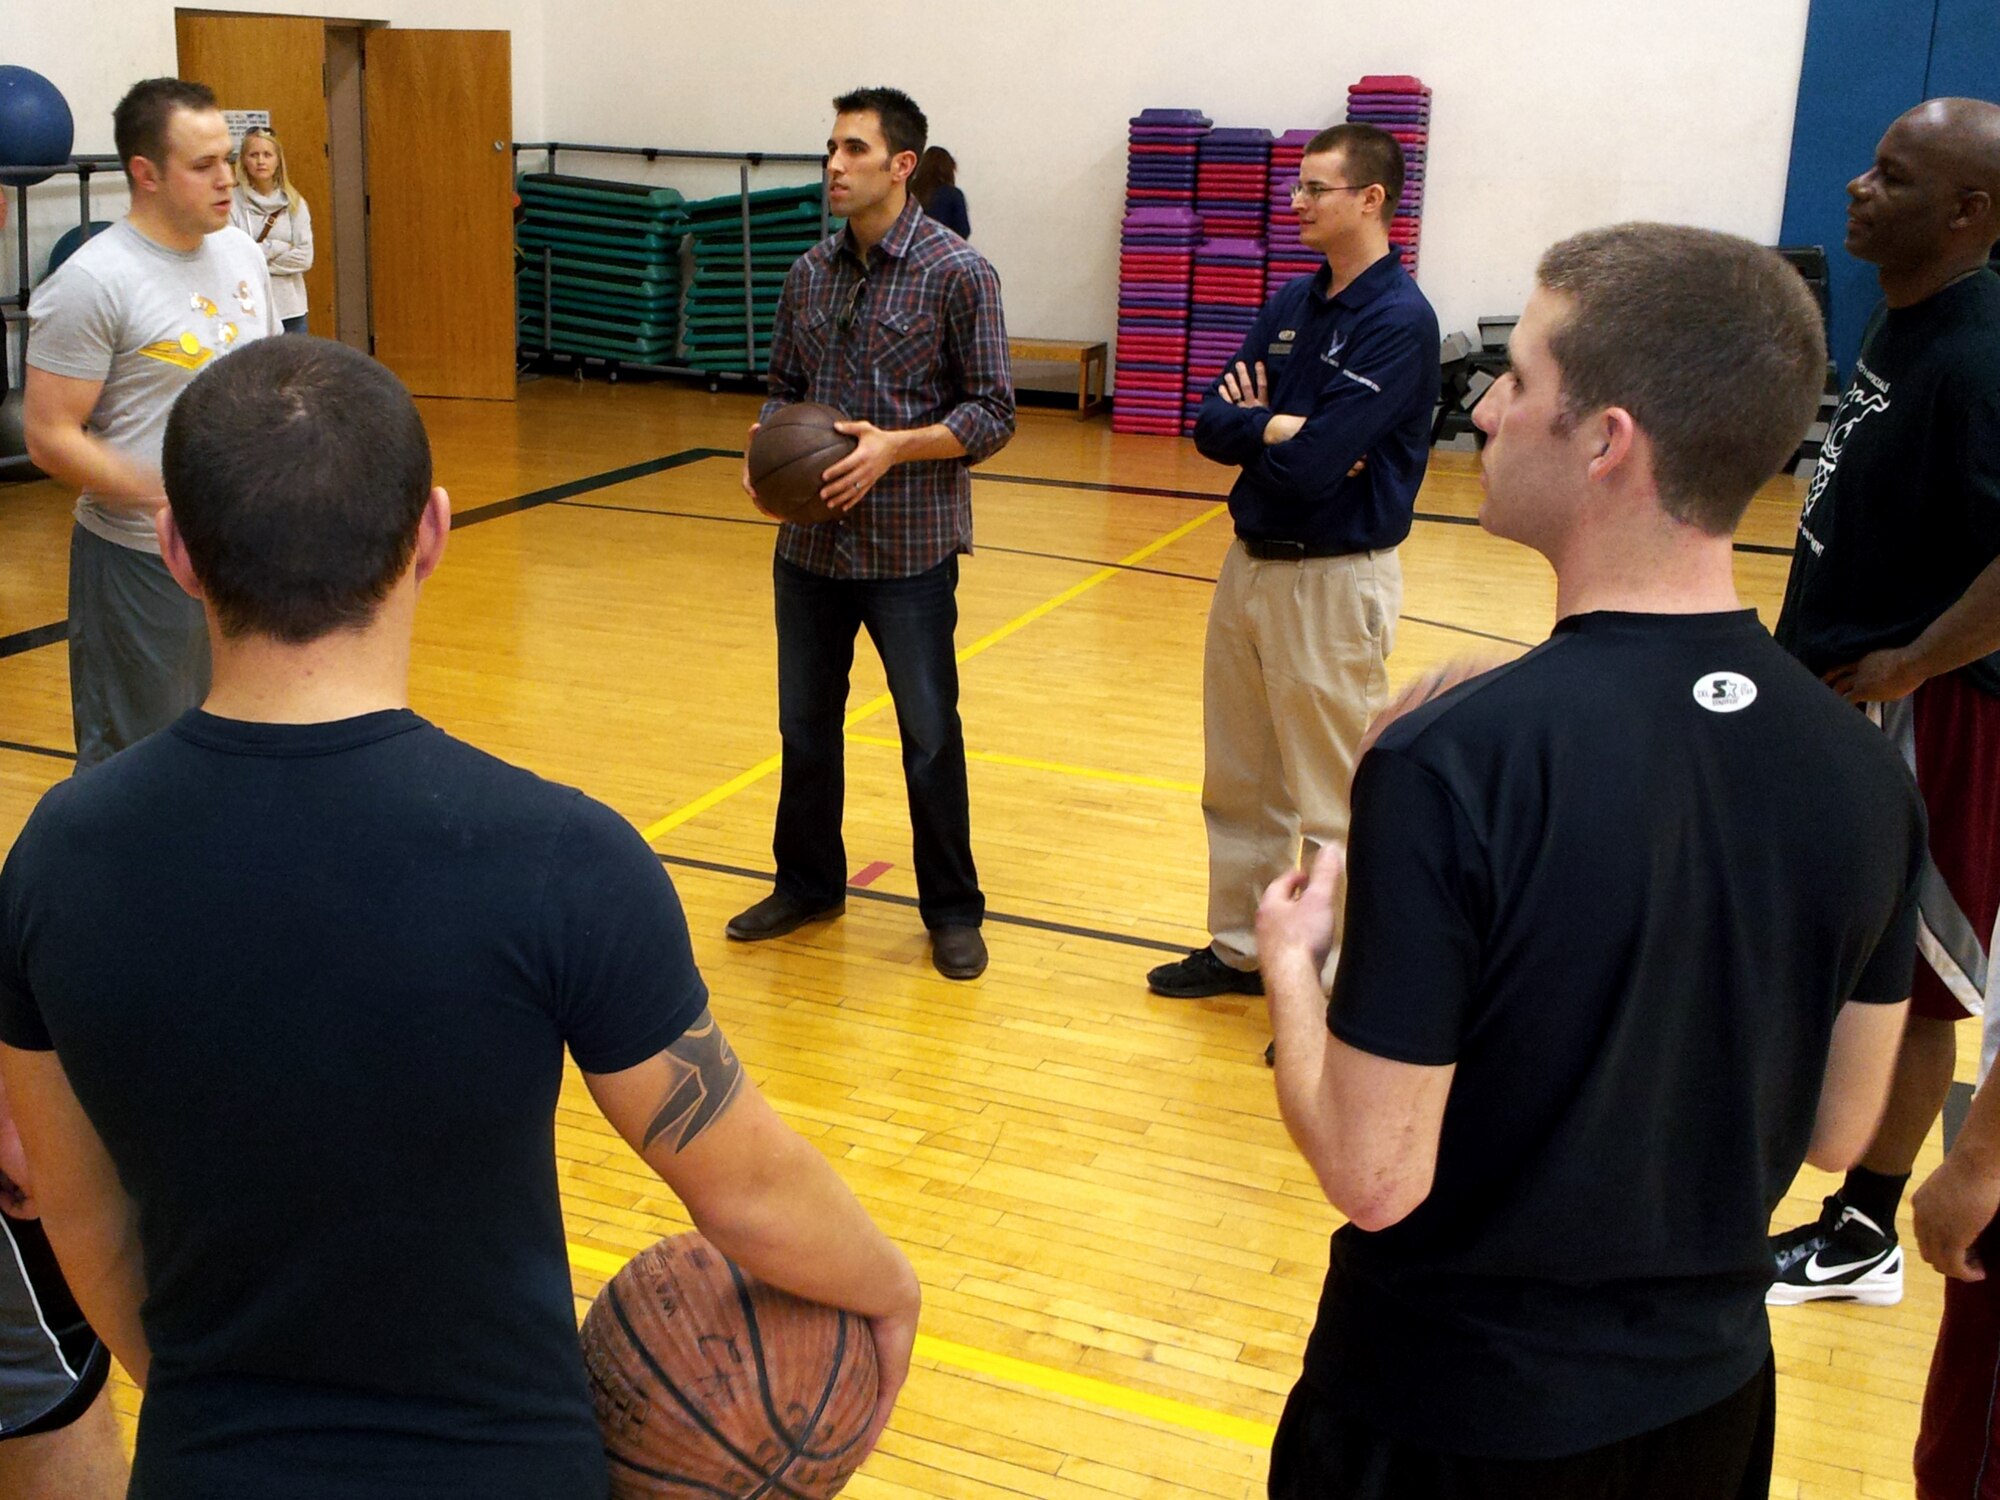 Aric Almirola, driver of the Air Force-sponsored No. 43 car, speaks with Airmen on the basketball court of the Nellis Air Force Base Fitness Center March 8, 2012. Almirola is scheduled to compete in the Kobalt Tools 400 NASCAR race at Las Vegas Motor Speedway March 11.